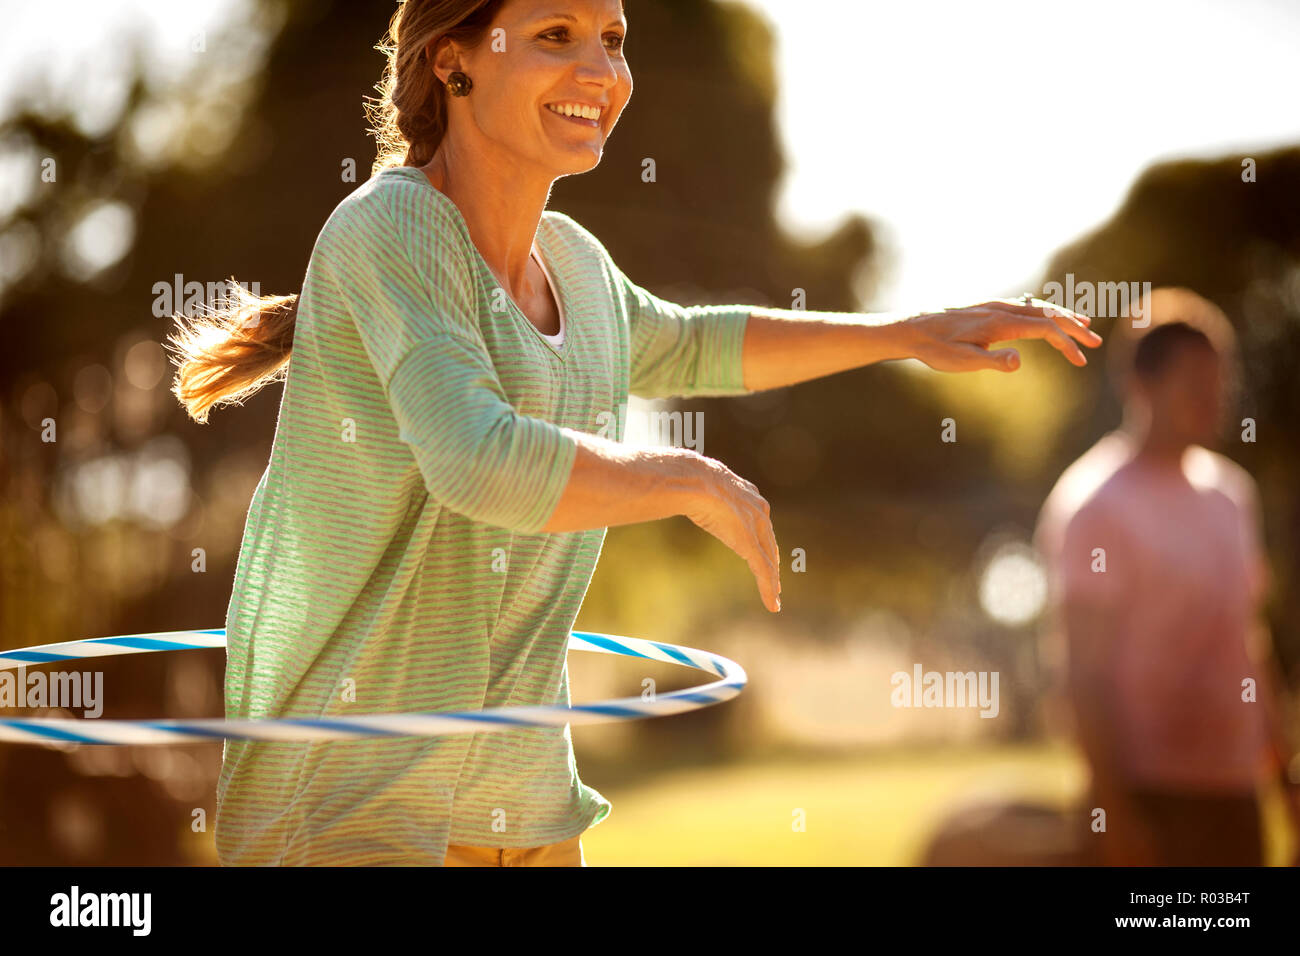 Mid adult woman using a hula hoop while at a park. Stock Photo